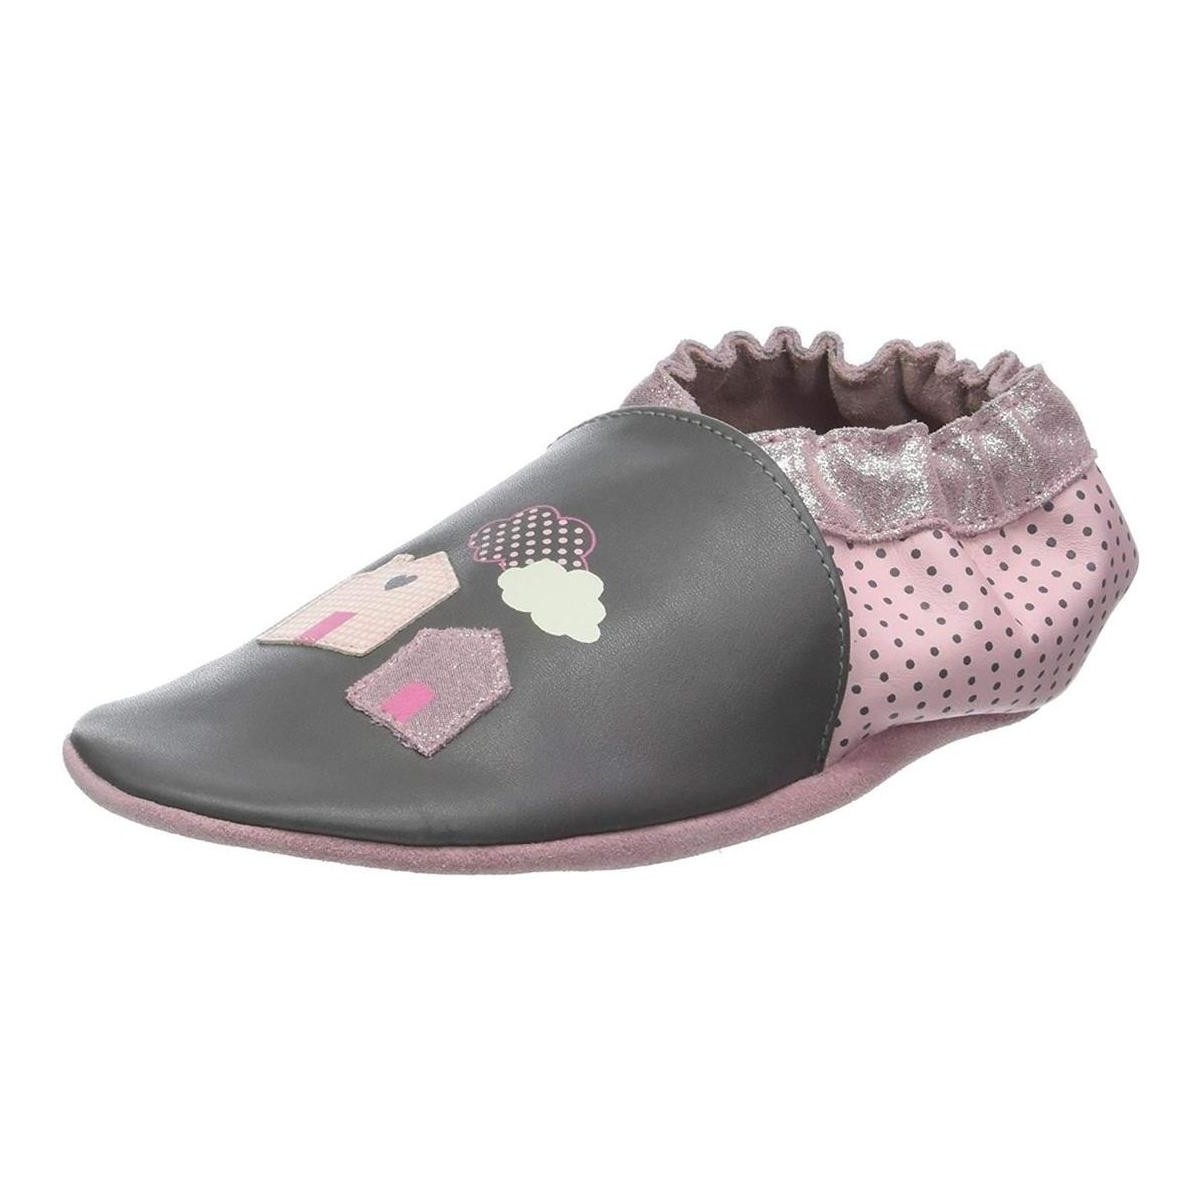 Chaussures Fille Chaussons Robeez HOME SWEET HOME Gris